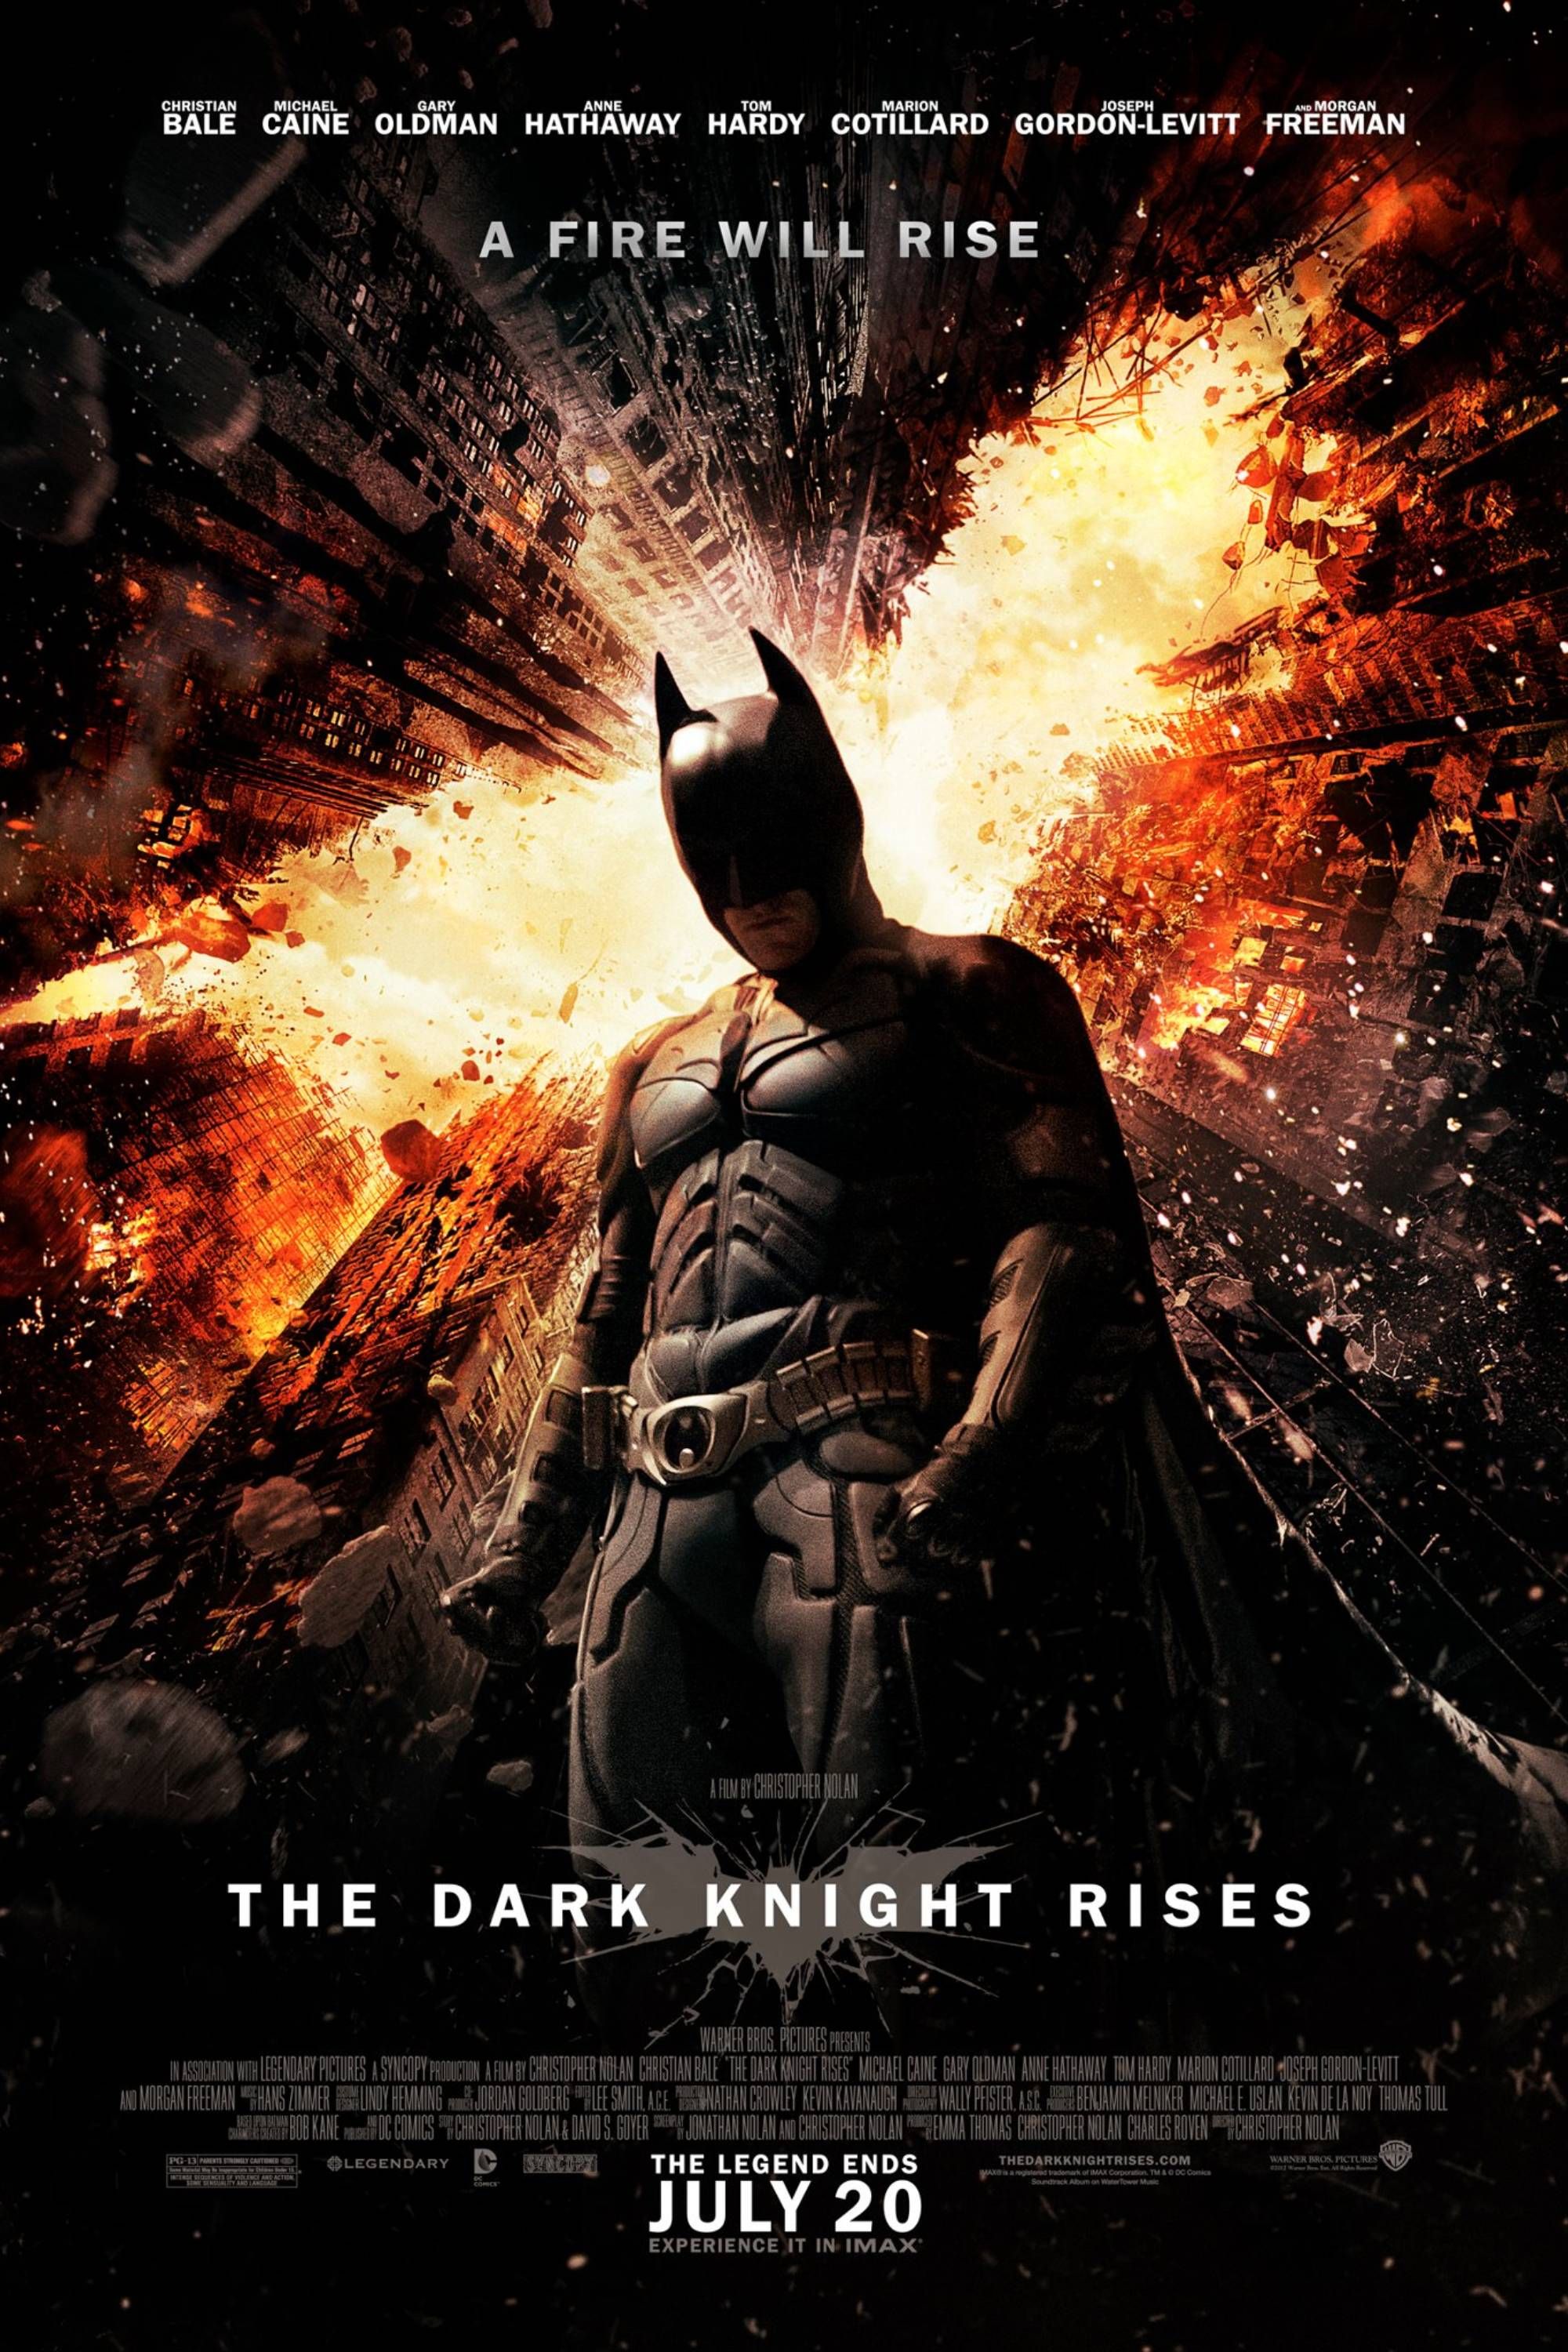 The Dark Knight Rises Theatrical Poster